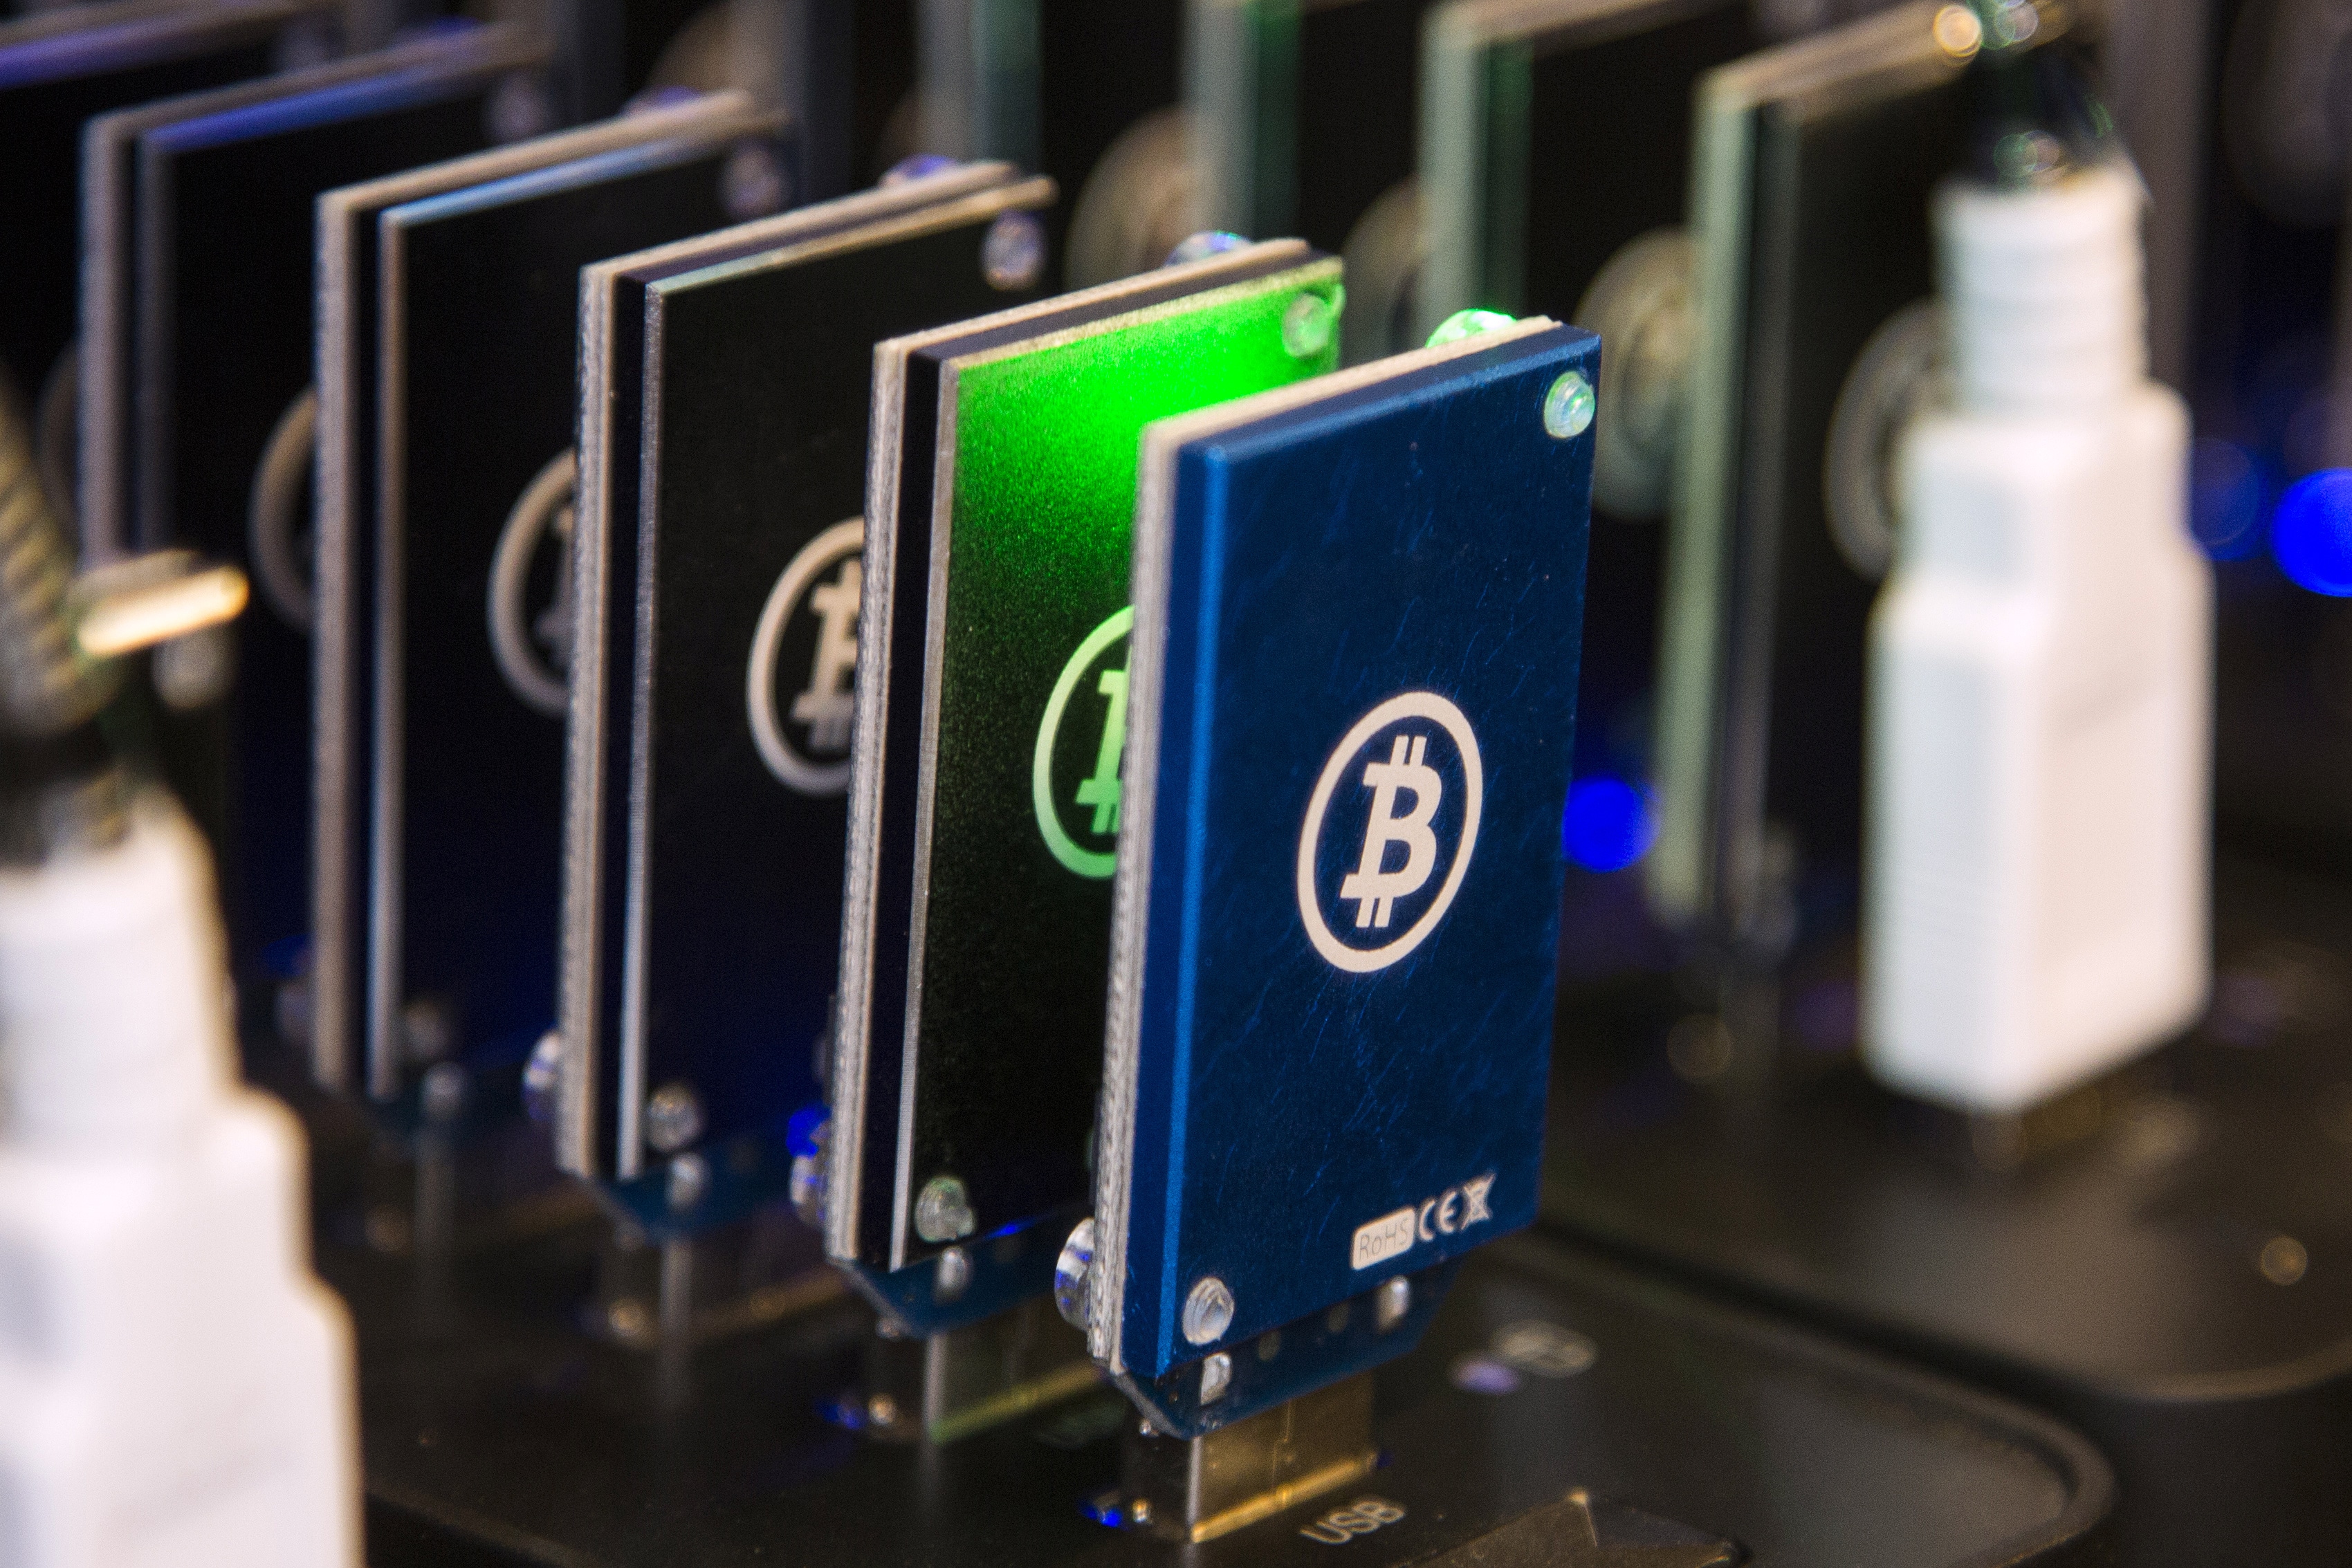 Japan’s DMM Enters Cryptocurrency Mining Race